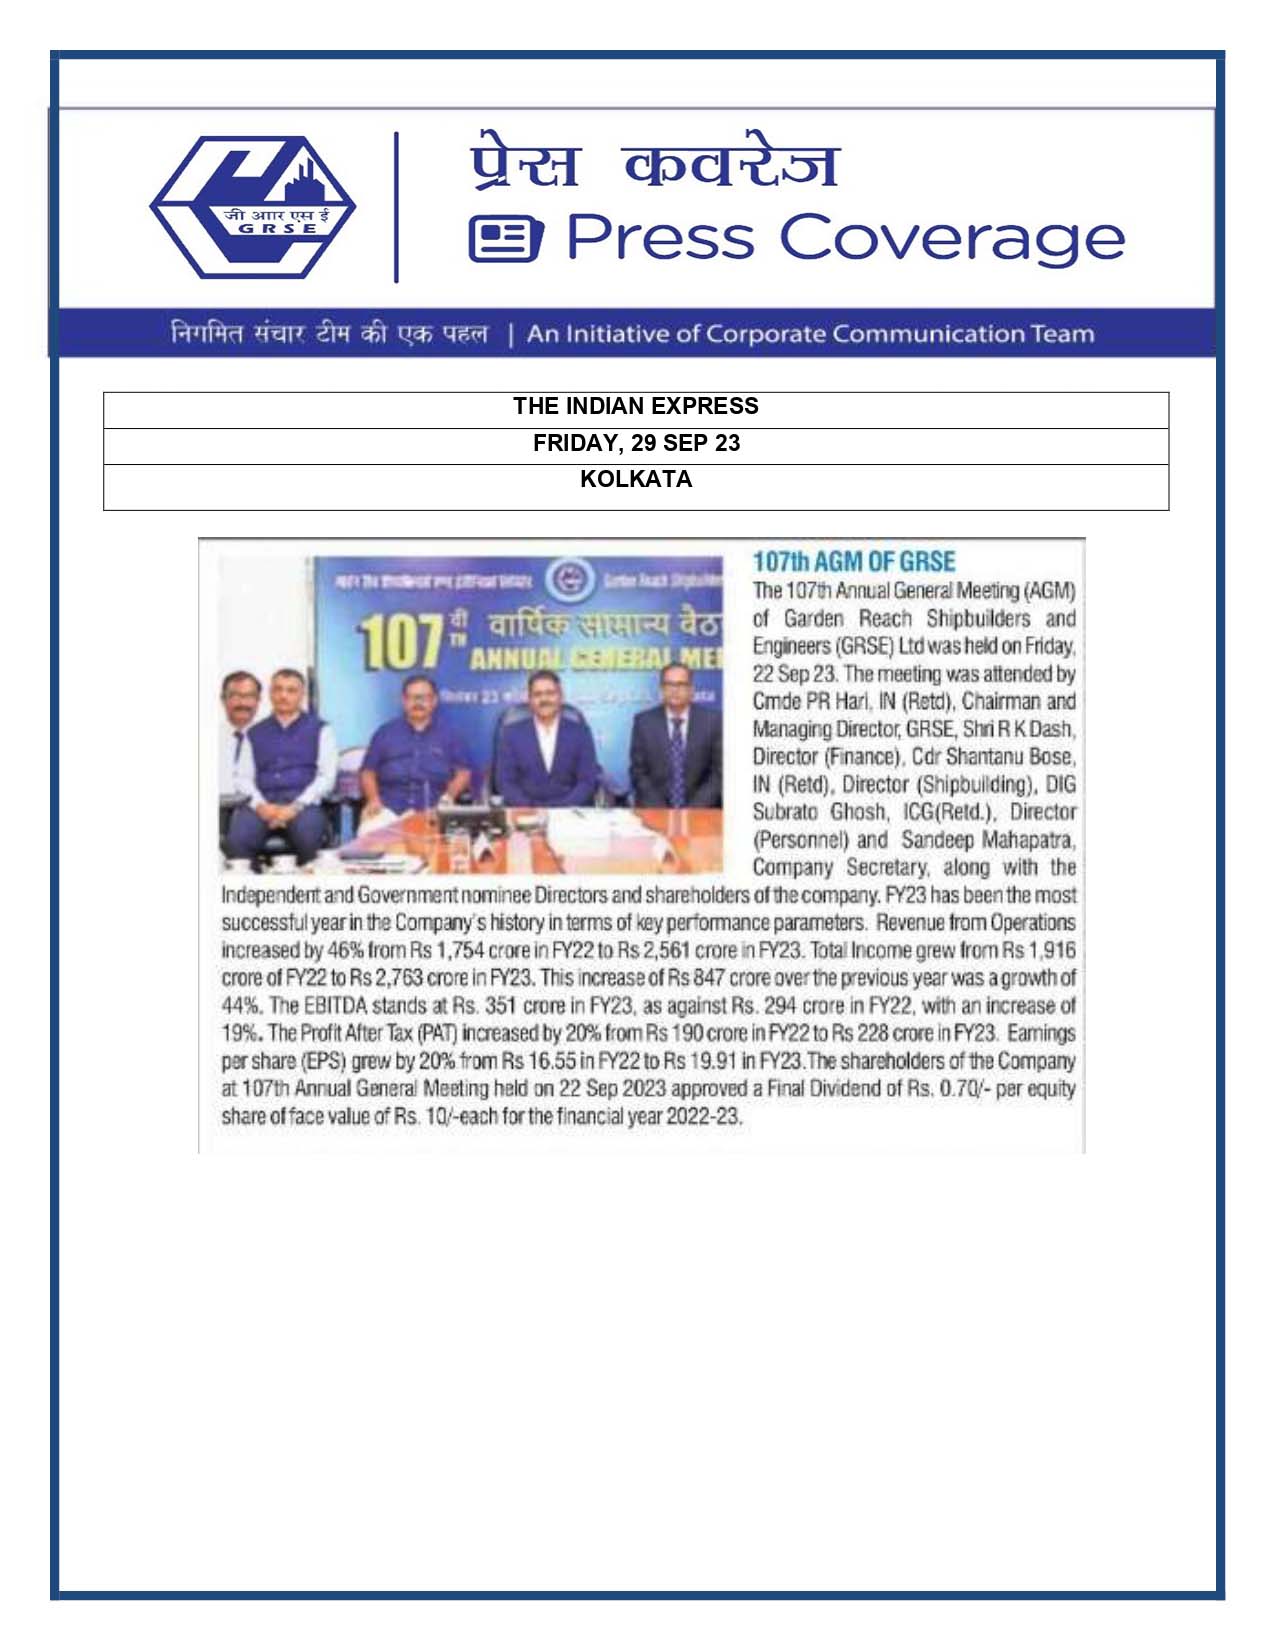 Press Coverage : The India Express, 29 Sep 23 : 107th AGM of GRSE